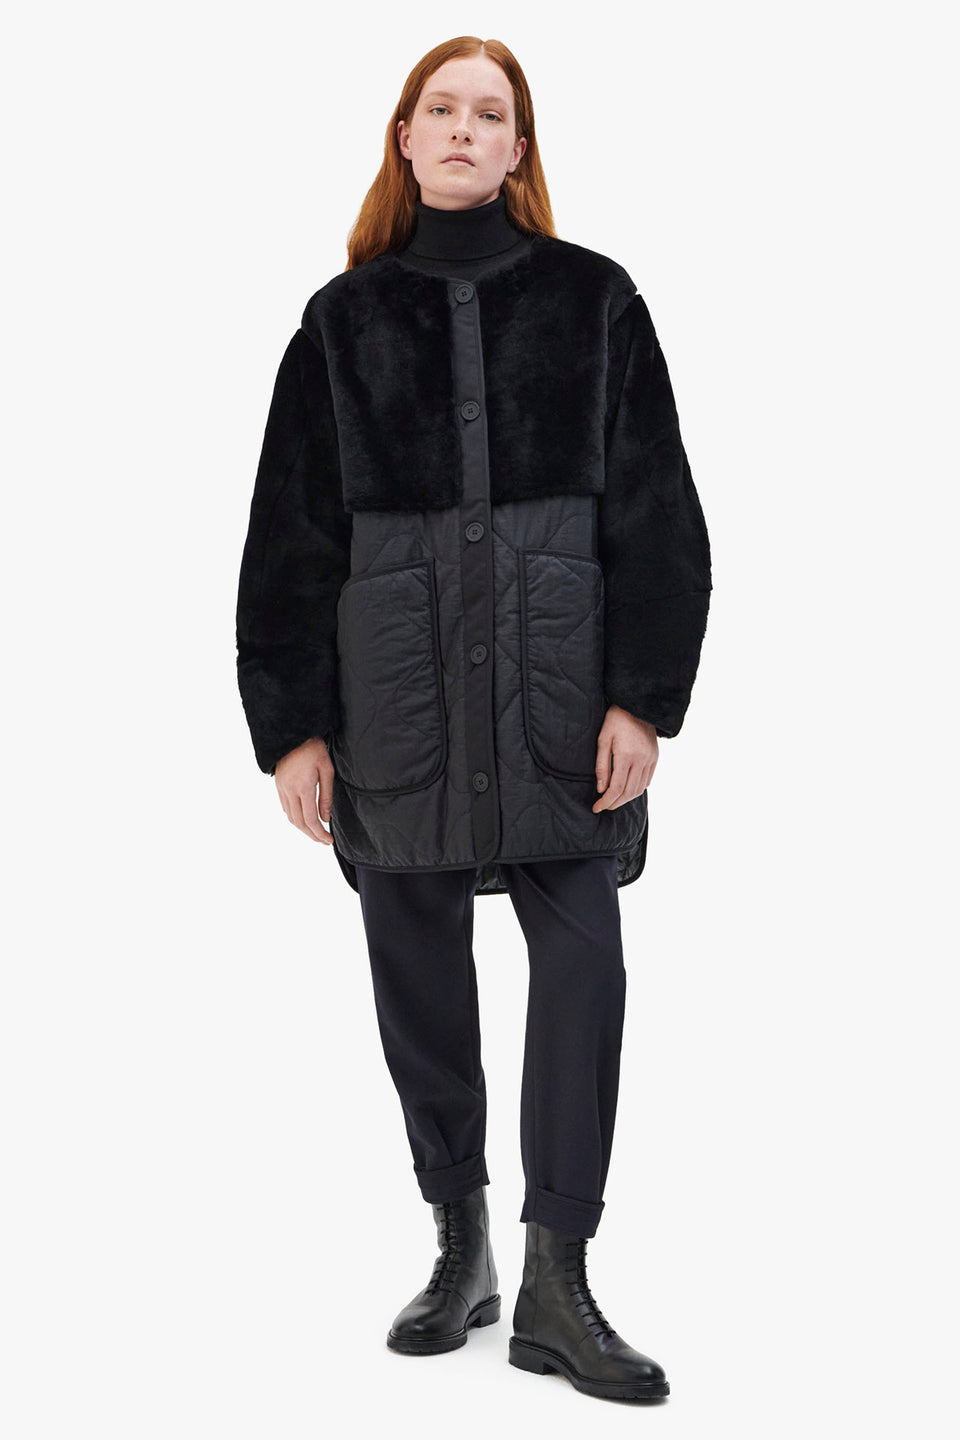 Shearling Quilt Jacket - Black / Anthracite (listing page thumbnail)